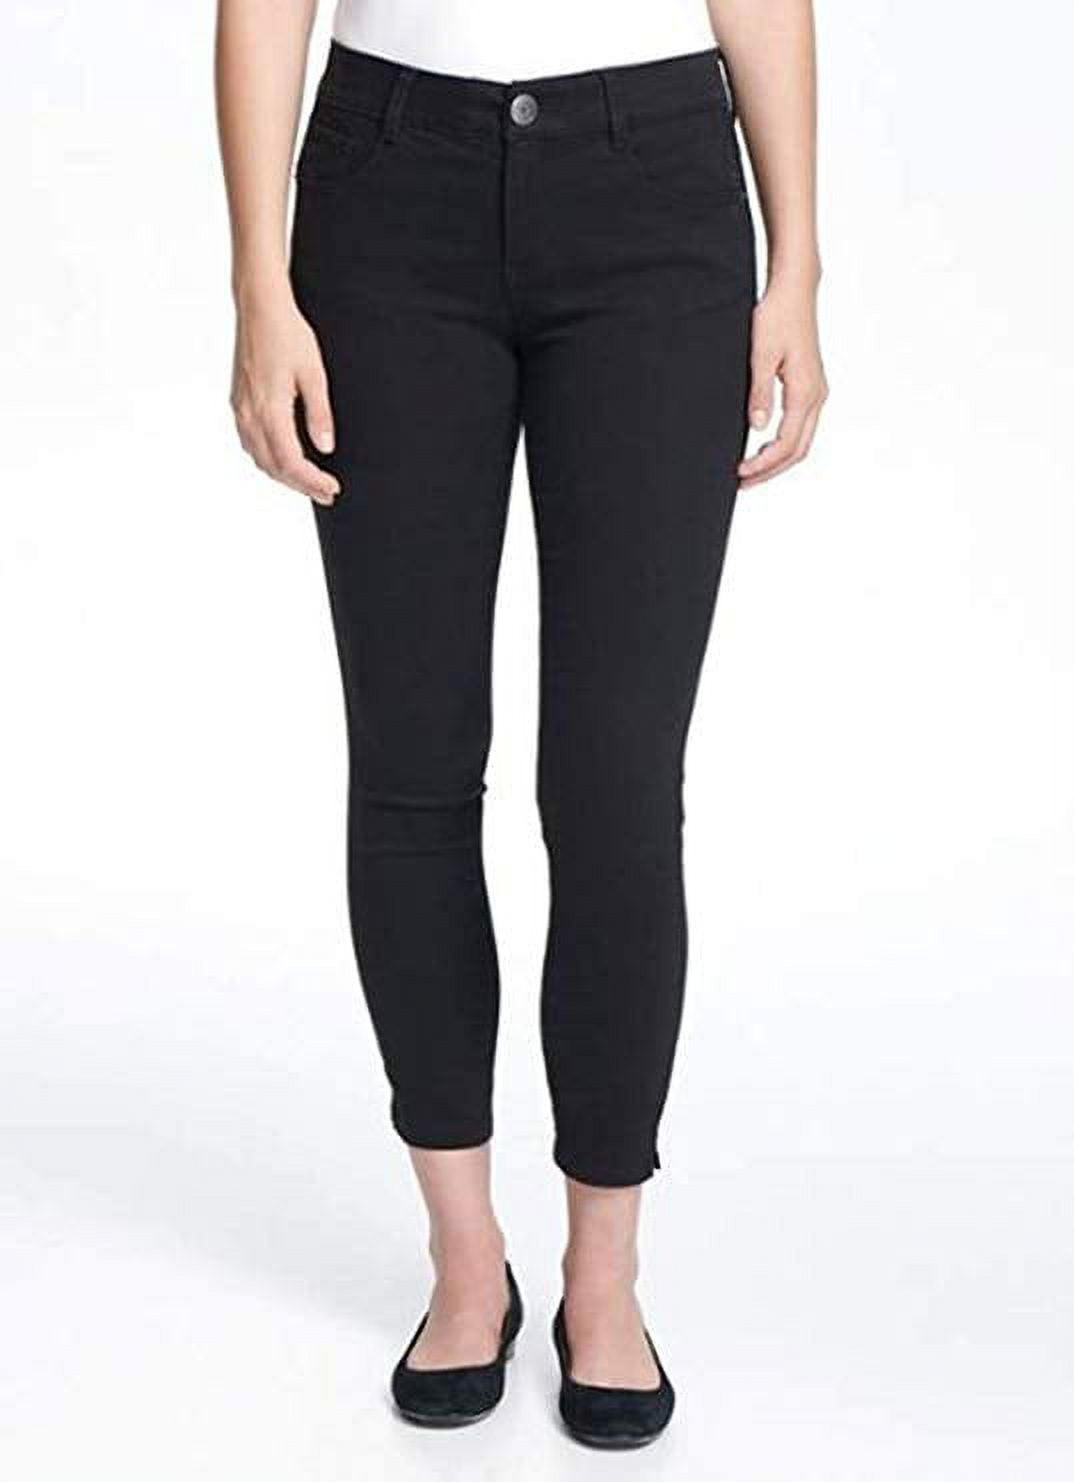 G.H. Bass & Co. Women's Stretch Skinny Ankle Crop Pants, Black 14 - NEW 